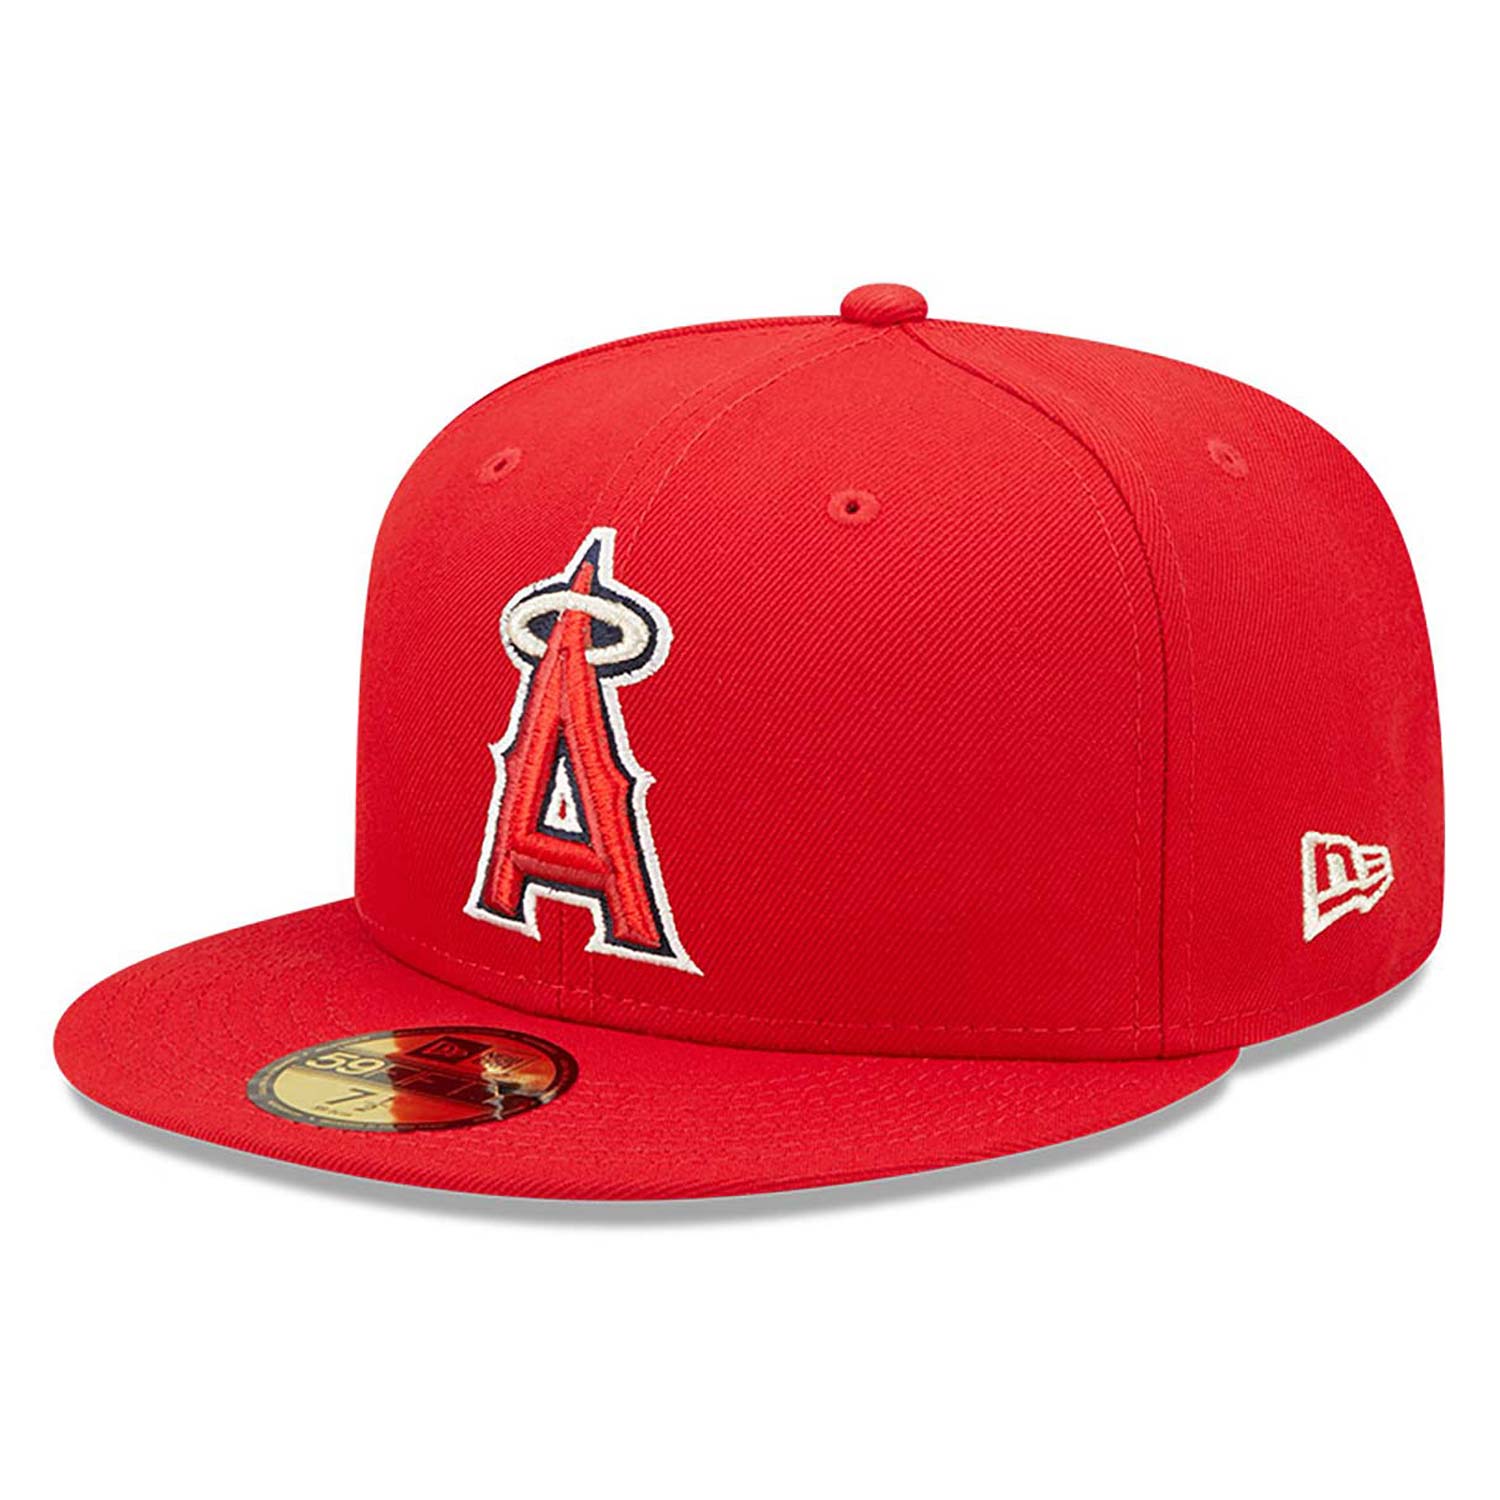 LA Angels Authentic On Field Red 59FIFTY Cap